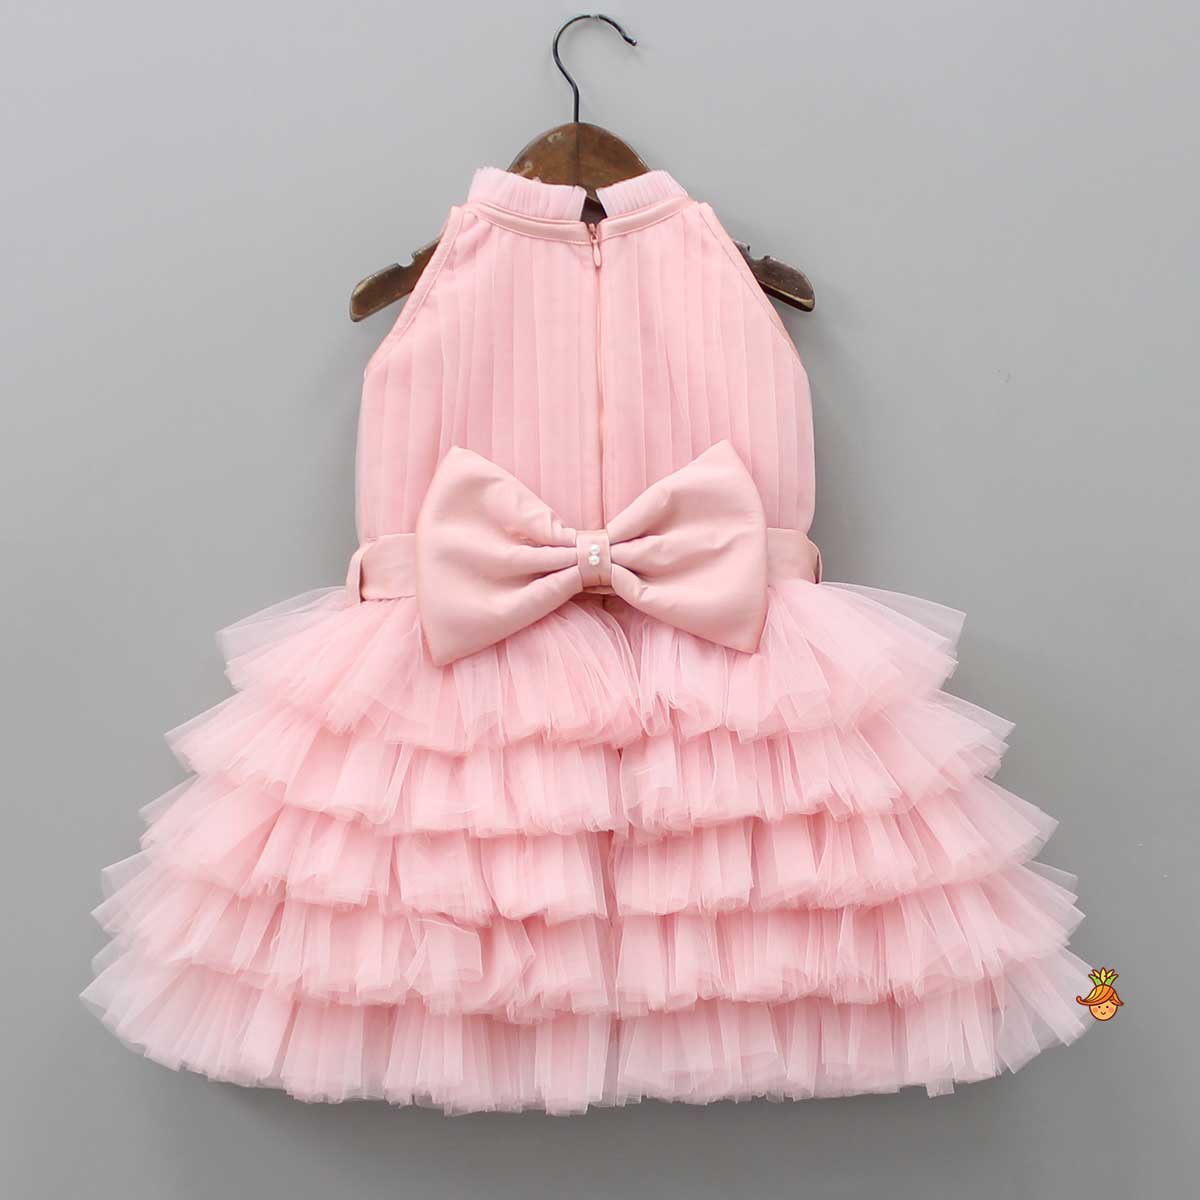 Pintuck Detailing And Frilly Layered Halter Neck Peach Dress With Matching Bowie Hair Band